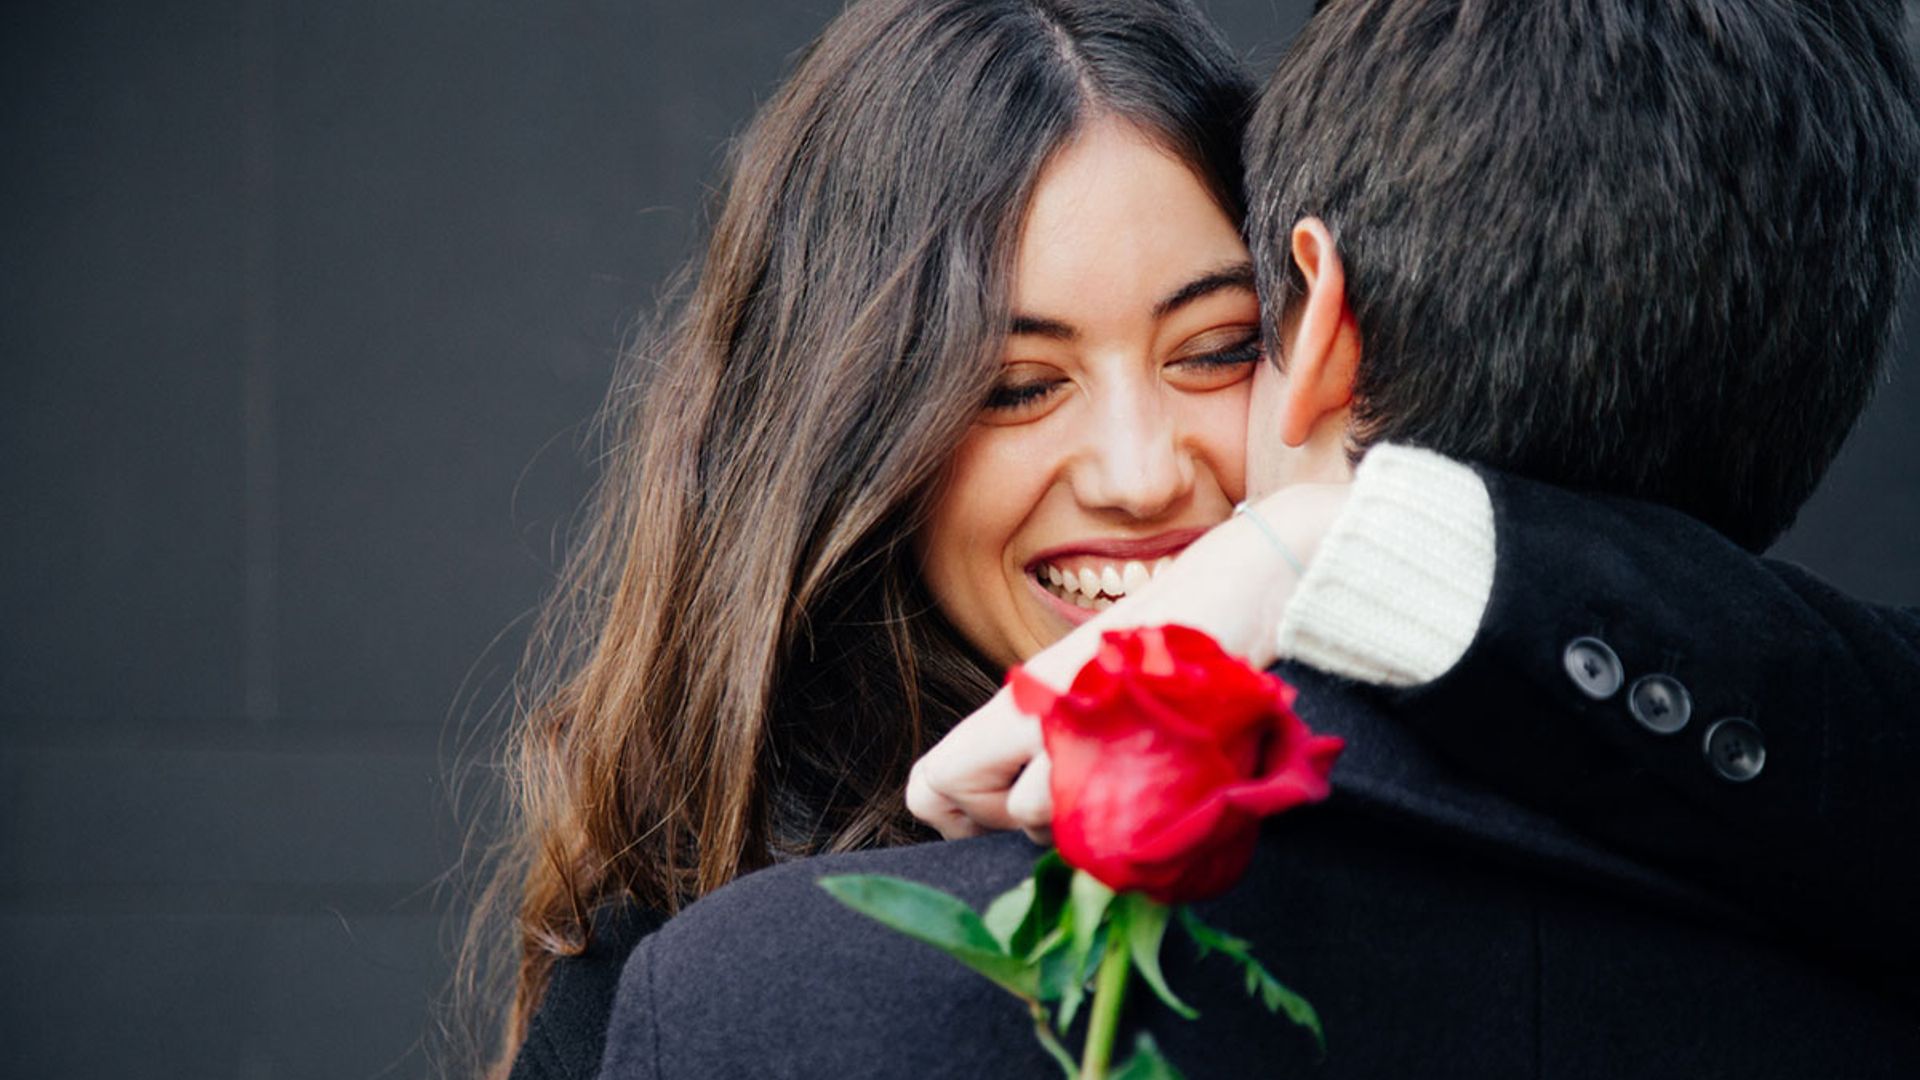 Best romantic gift ideas for her this Valentine's Day 2022: Sweet presents women will love